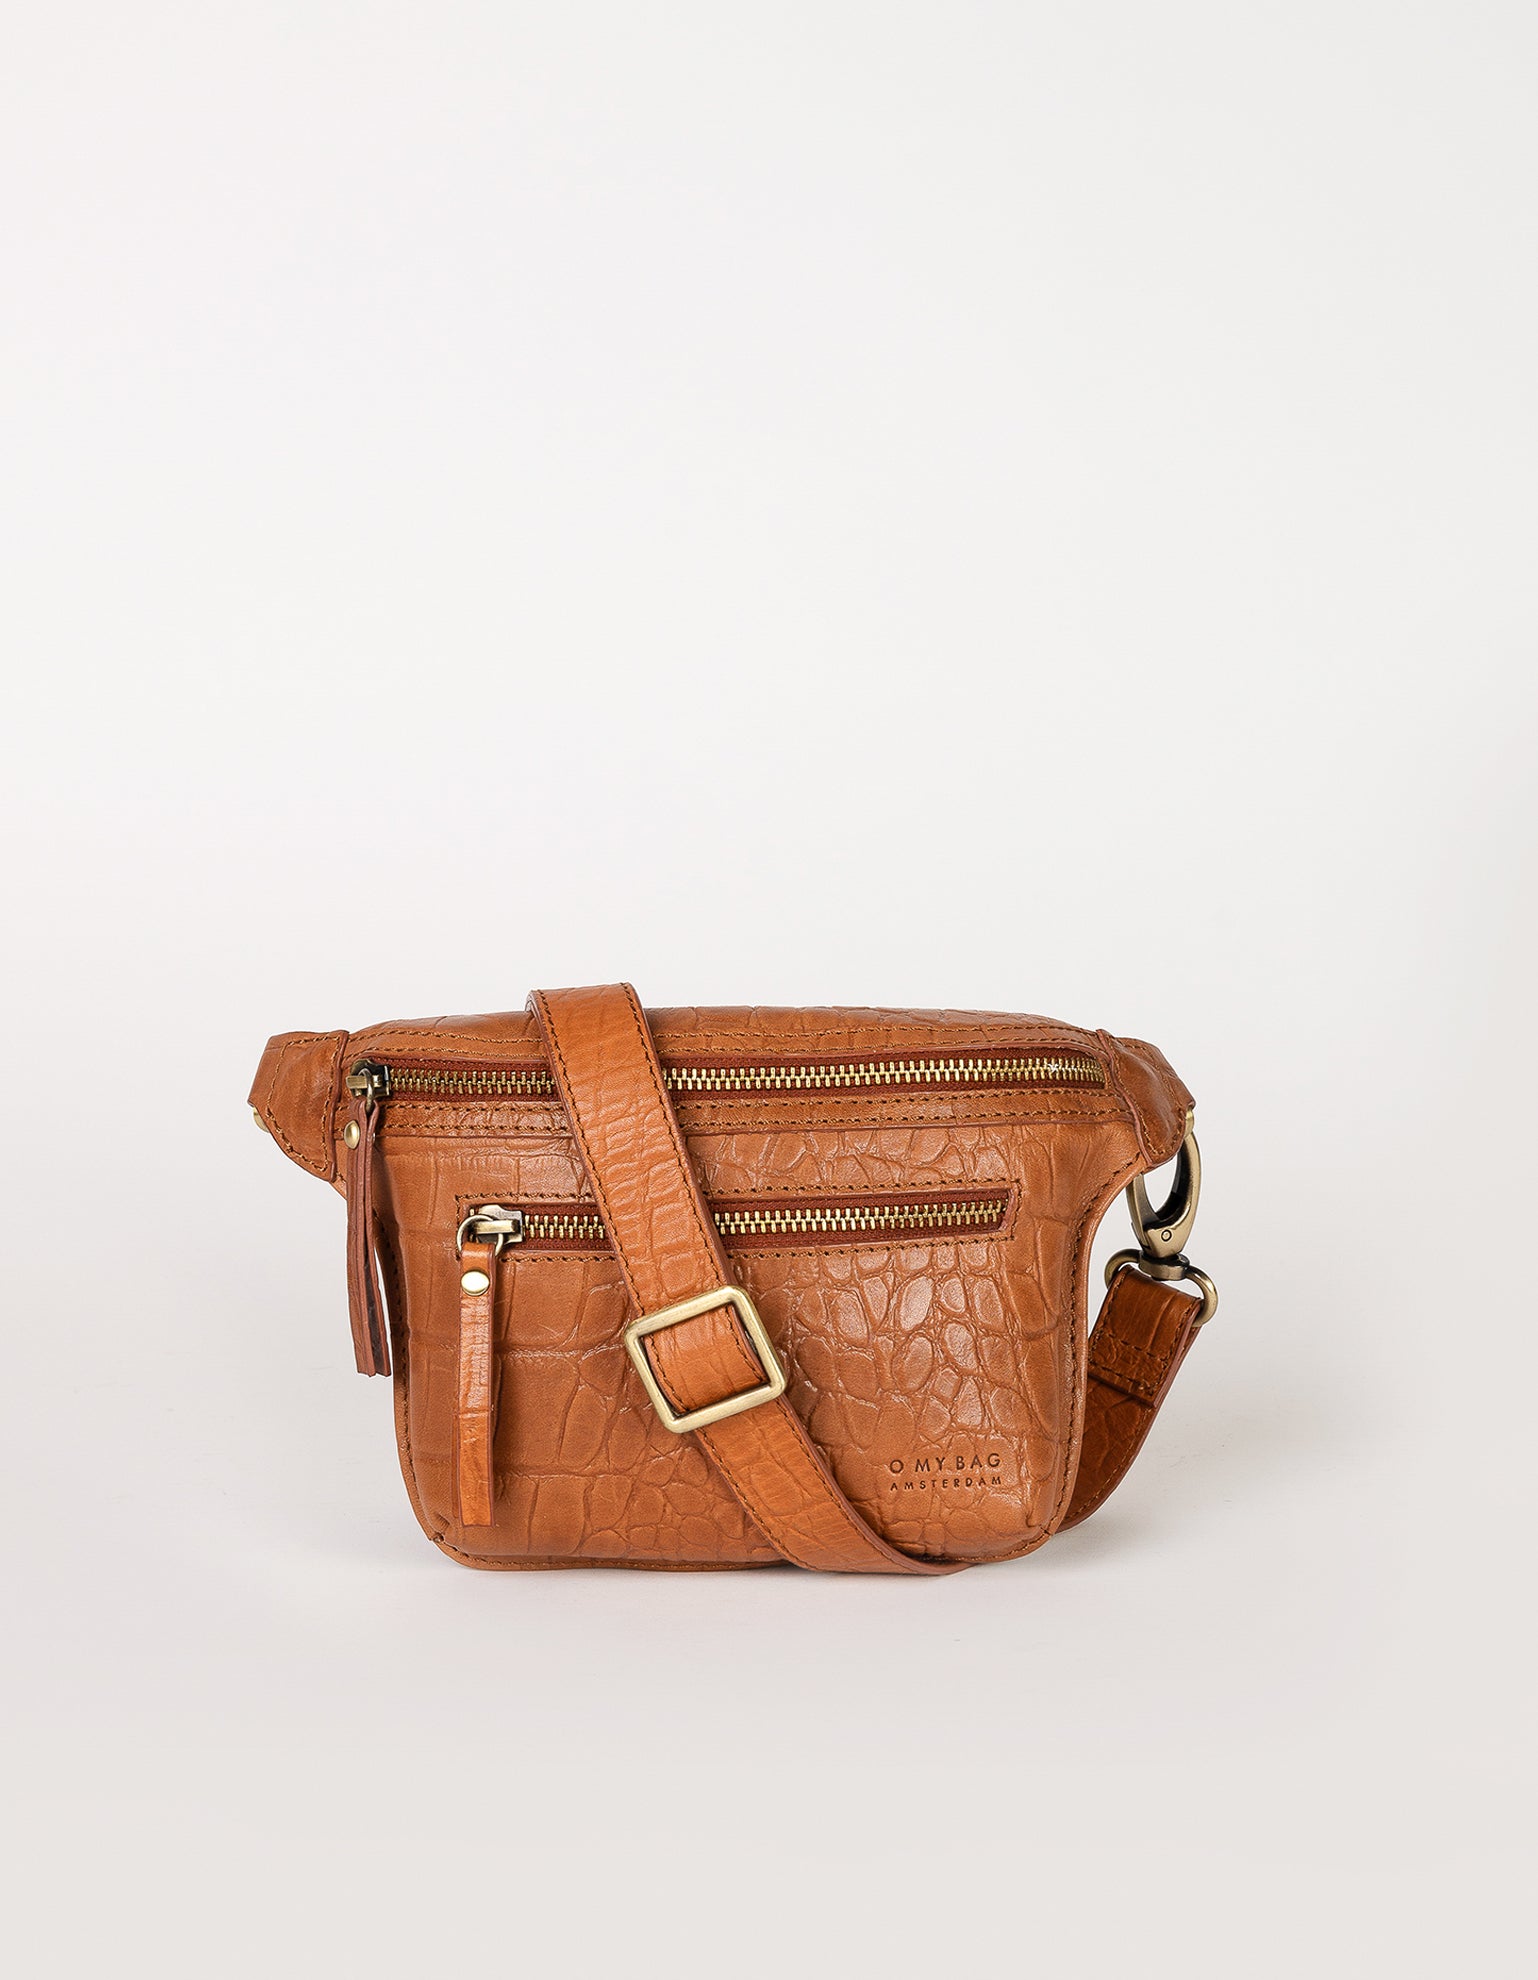 Wild Oak Croco Leather womens fanny pack. Square shape with an adjustable strap. Front product image